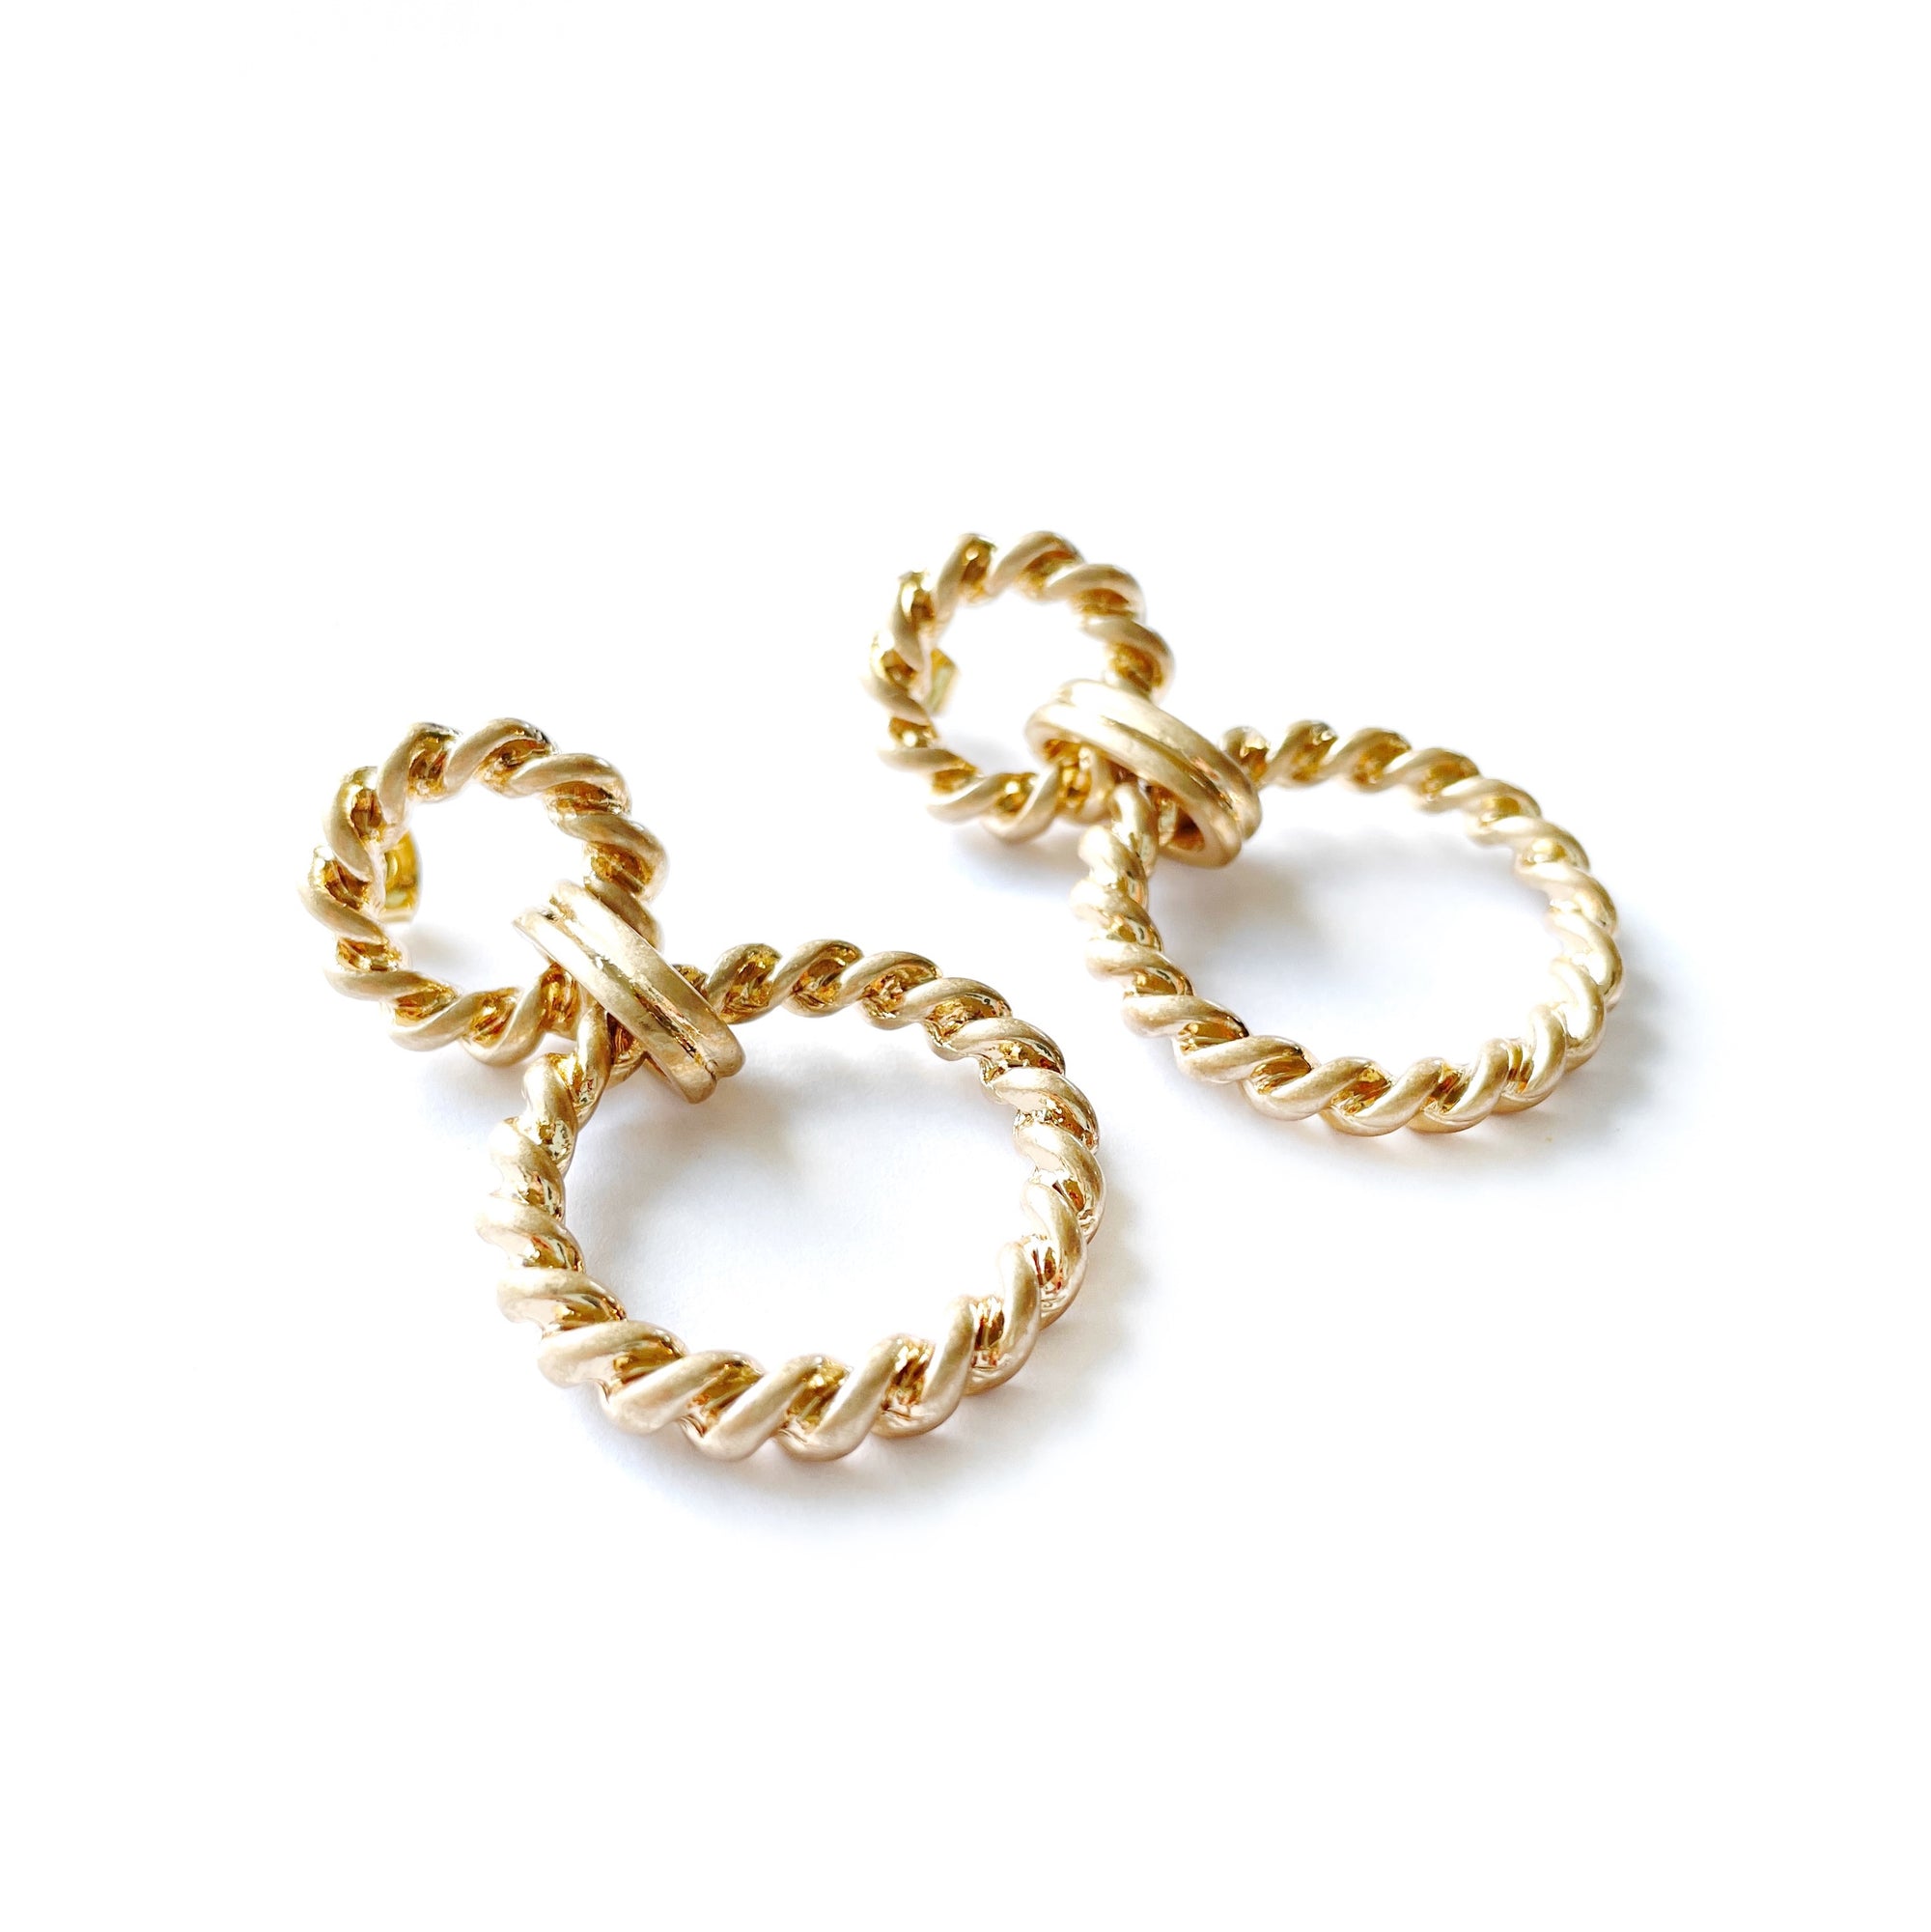 opulent gold linked hoop earrings with a twisted rope design 